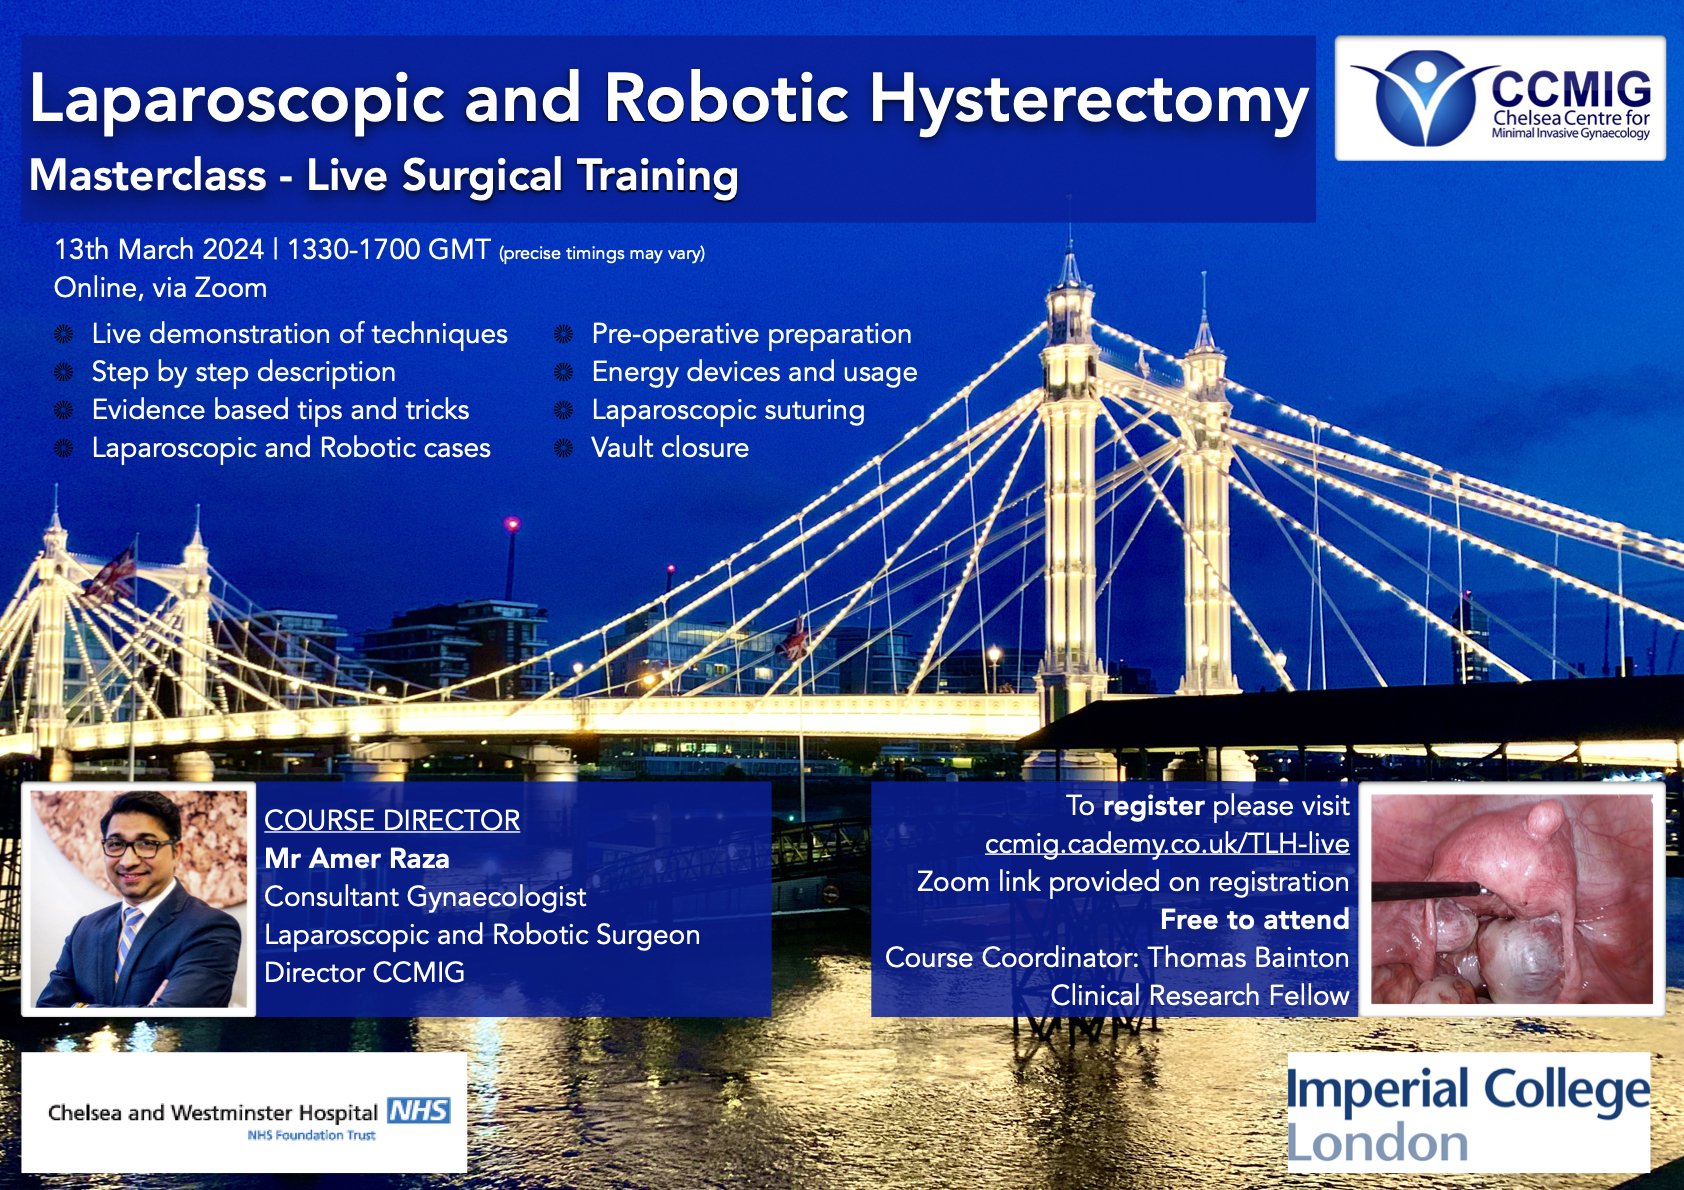 Total Laparoscopic and Robotic Hysterectomy Masterclass - Live Surgery